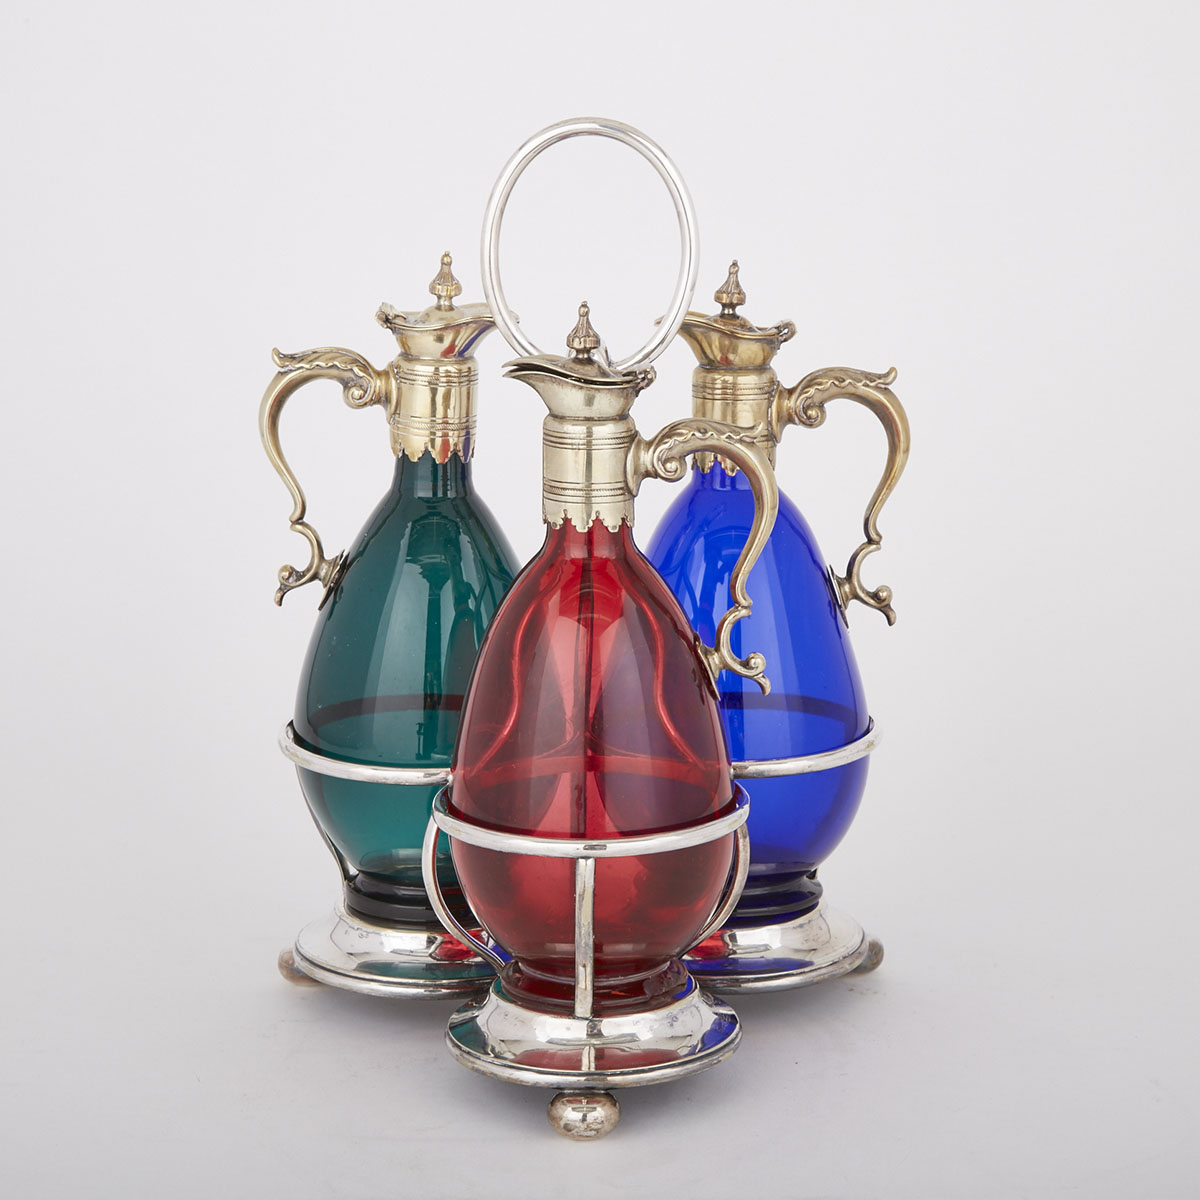 Edwardian Silver Plated and Coloured Glass Three-Bottle Tantalus, early 20th century